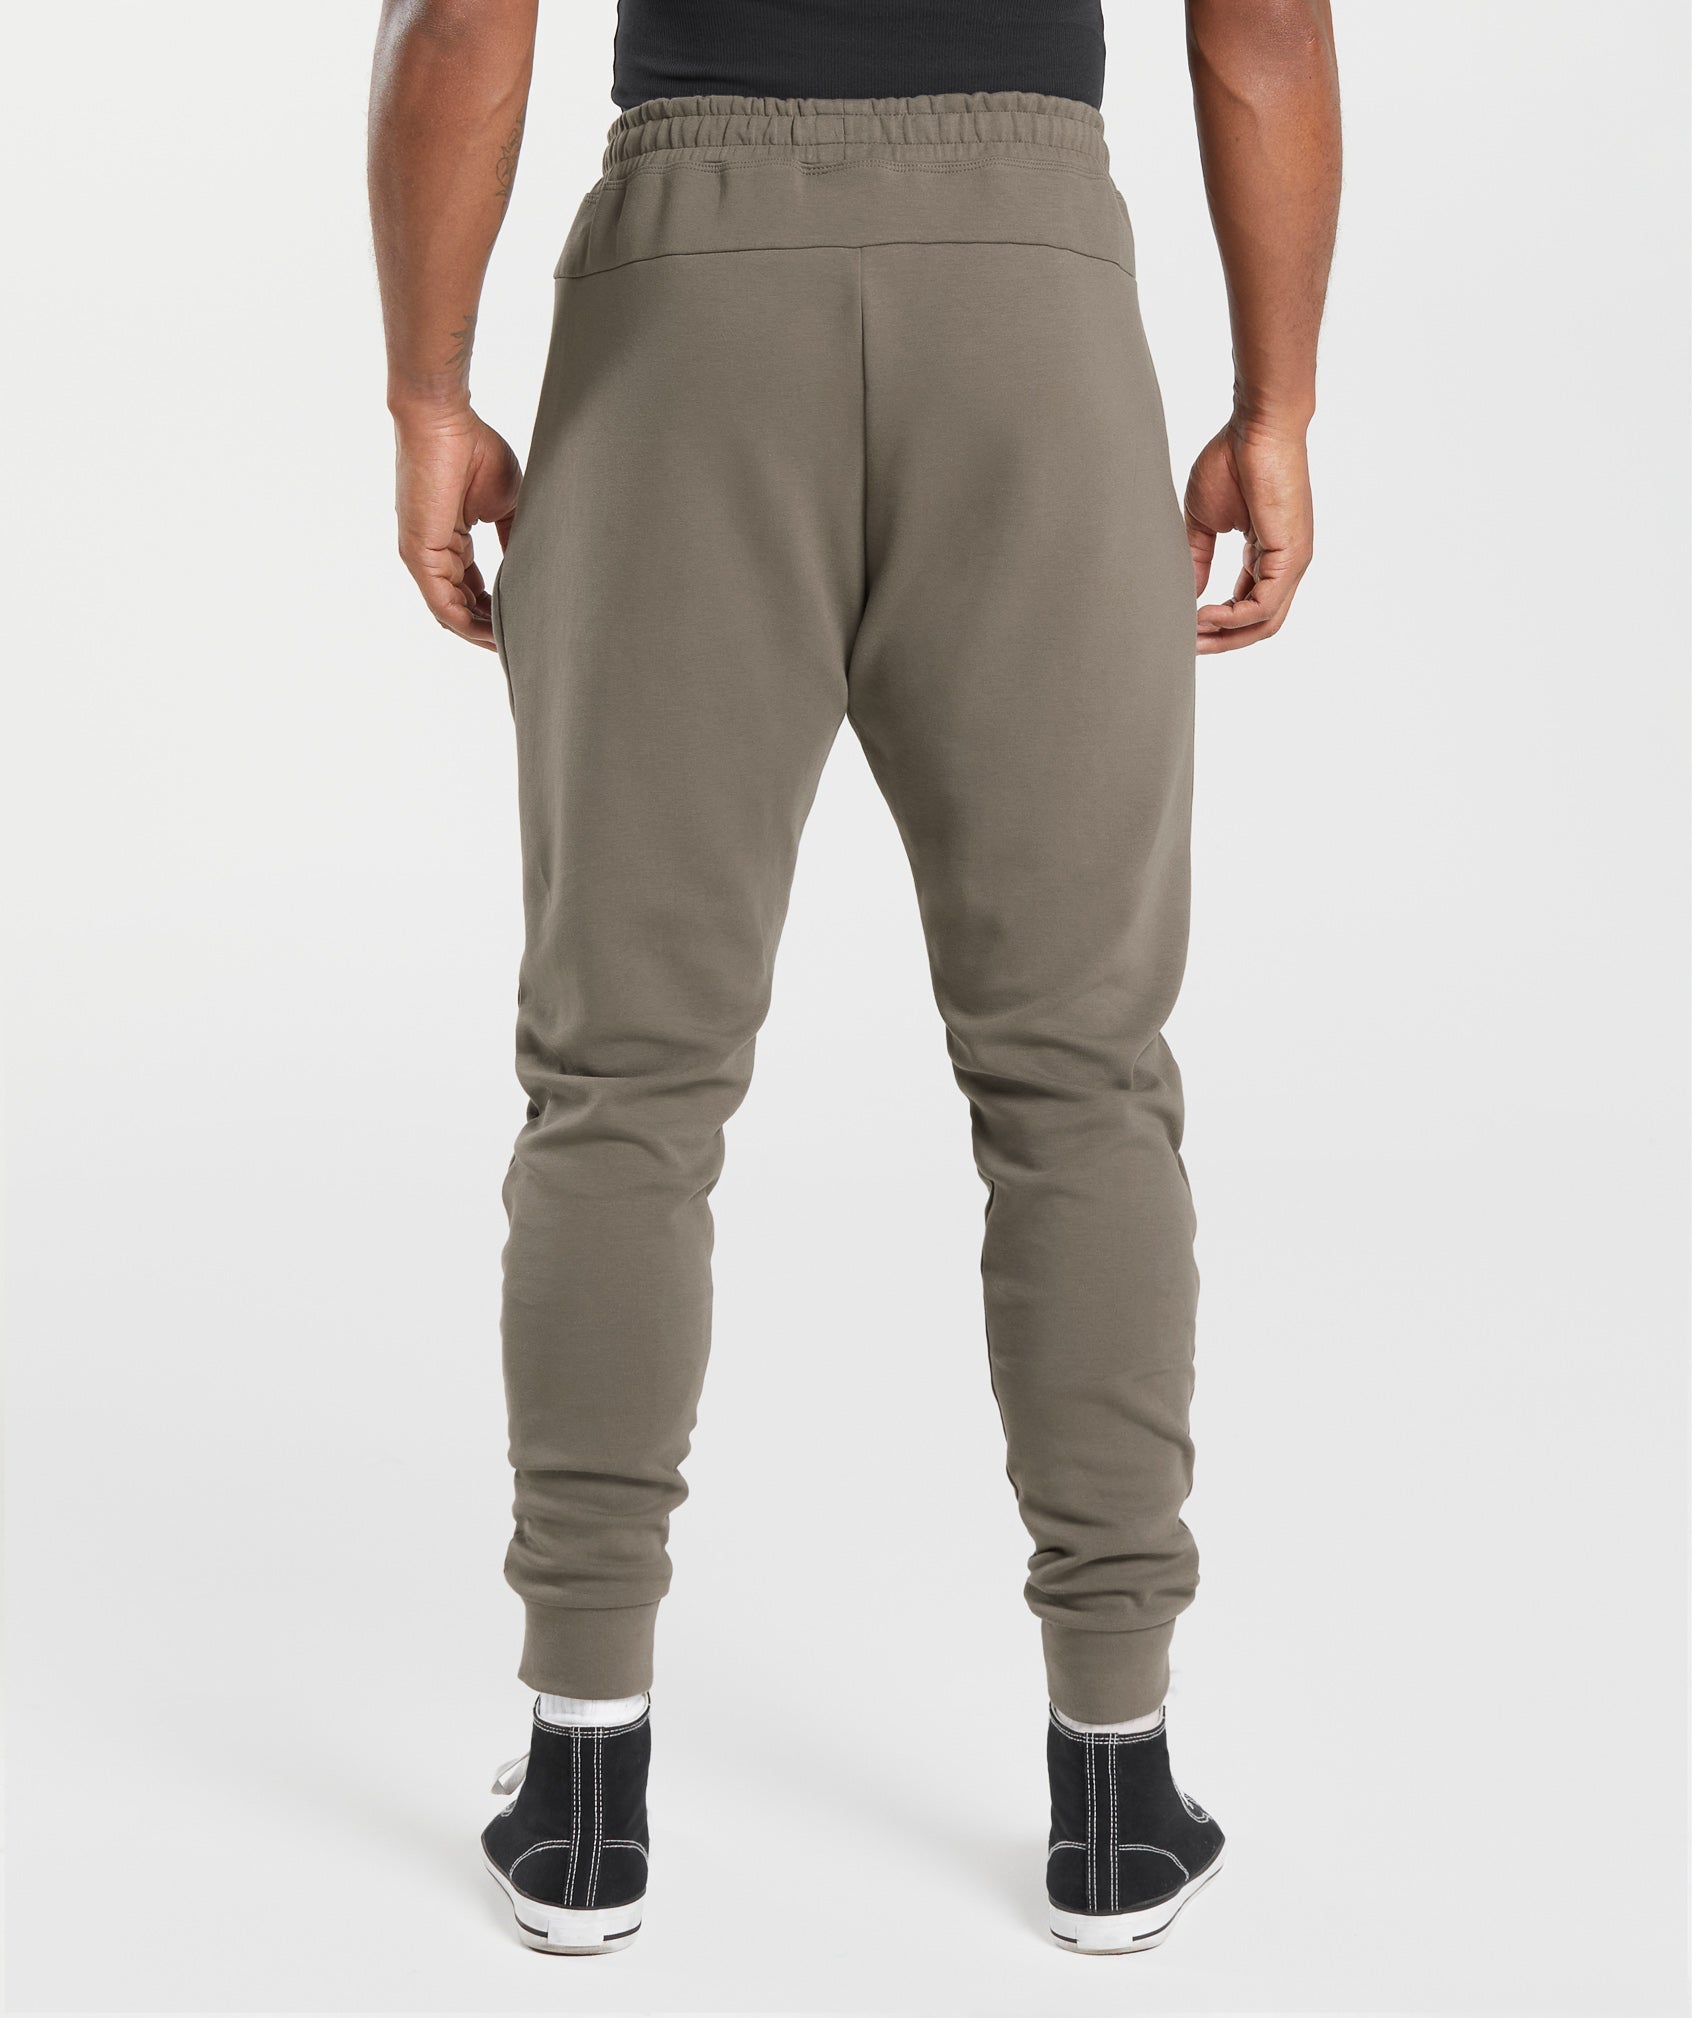 Rest Day Knit Joggers in Camo Brown - view 2